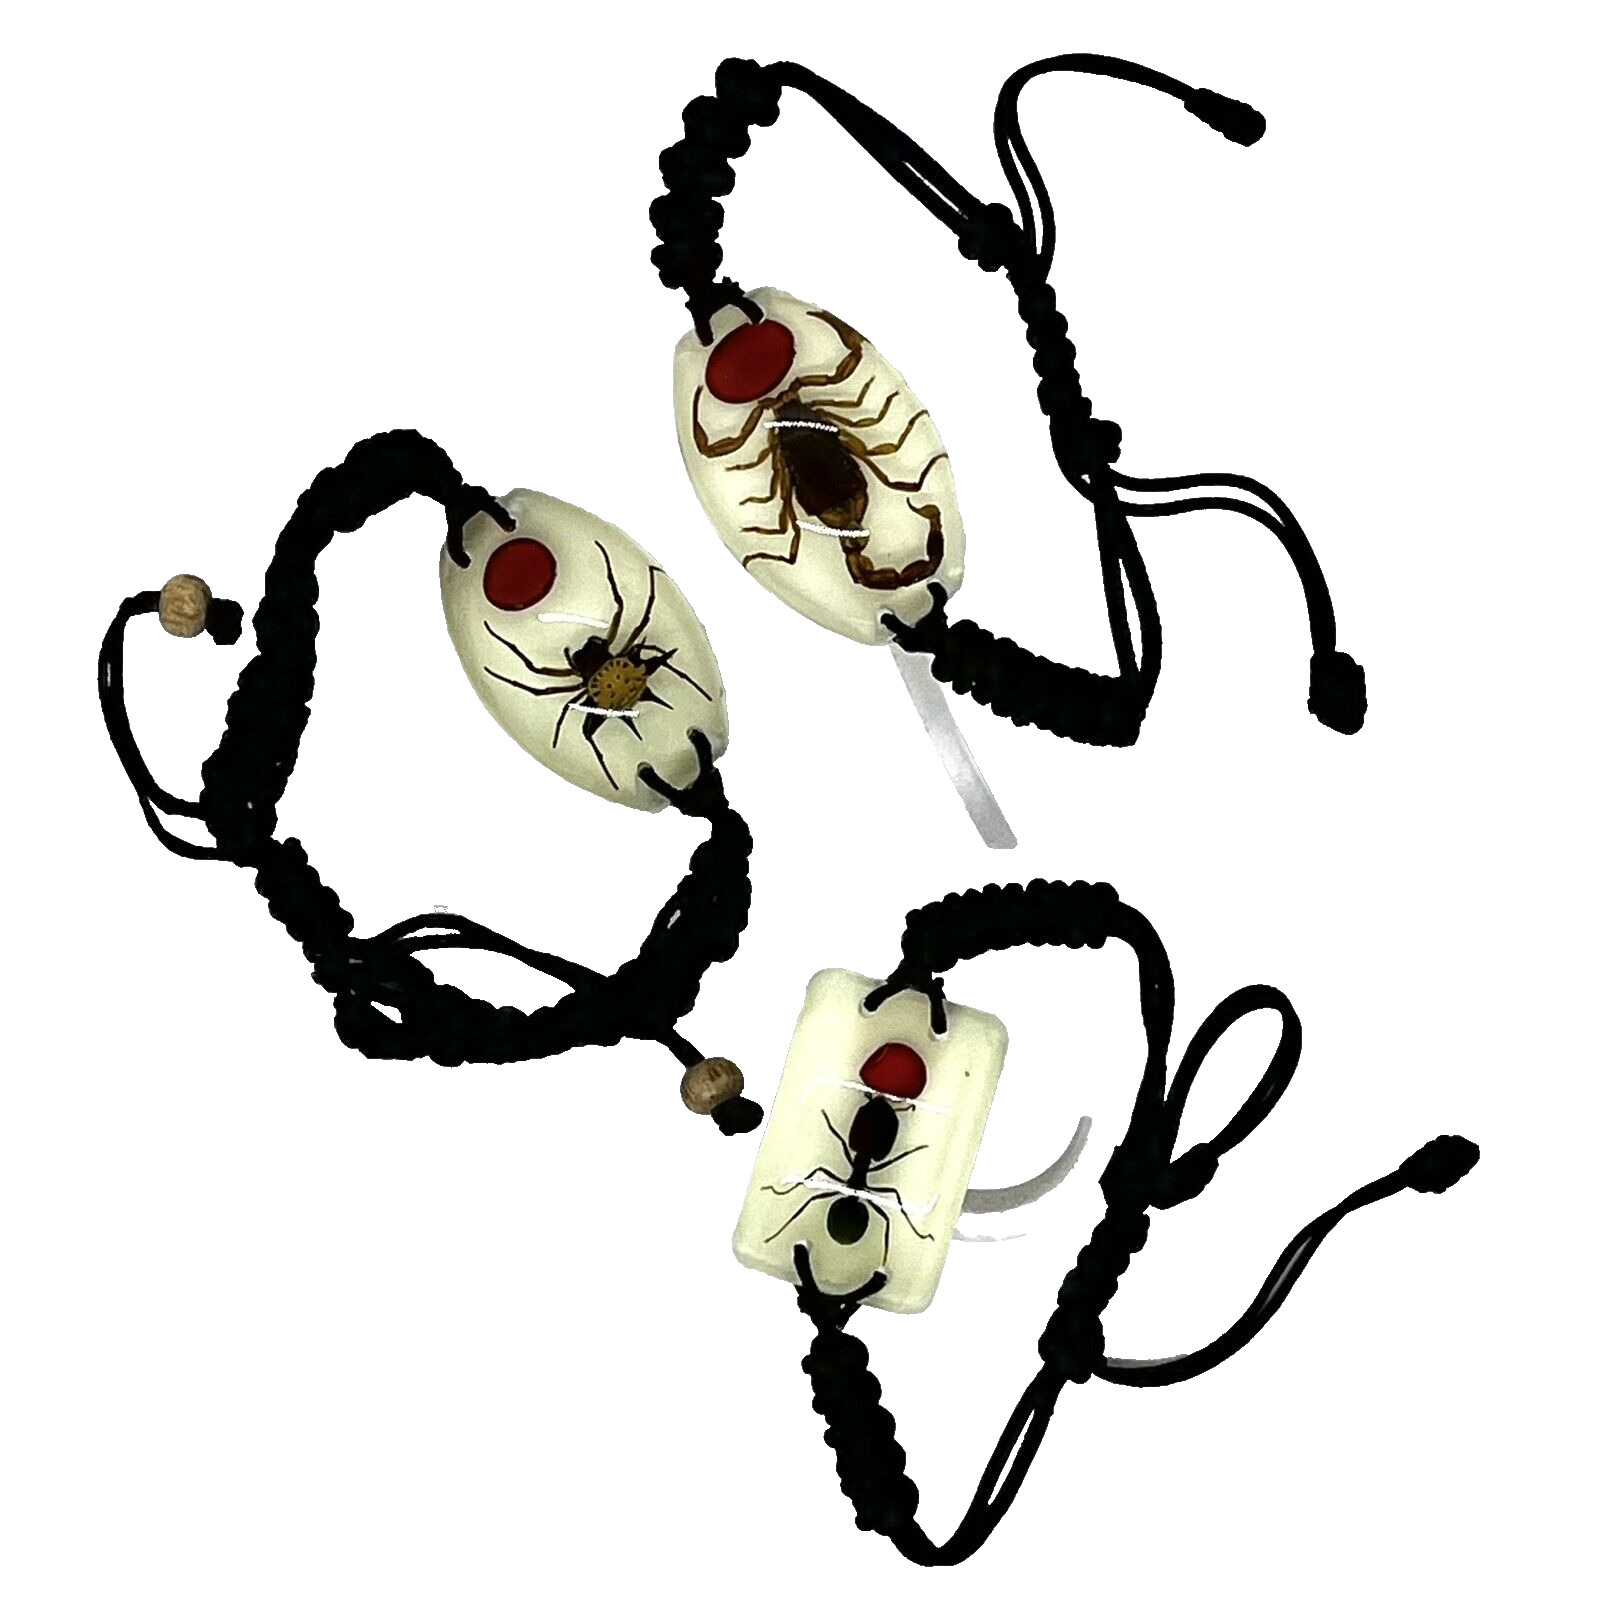 Insect ( Spider, Ant, Scorpion) Glow Bracelet in Resin Specimen Collection 3 pcs